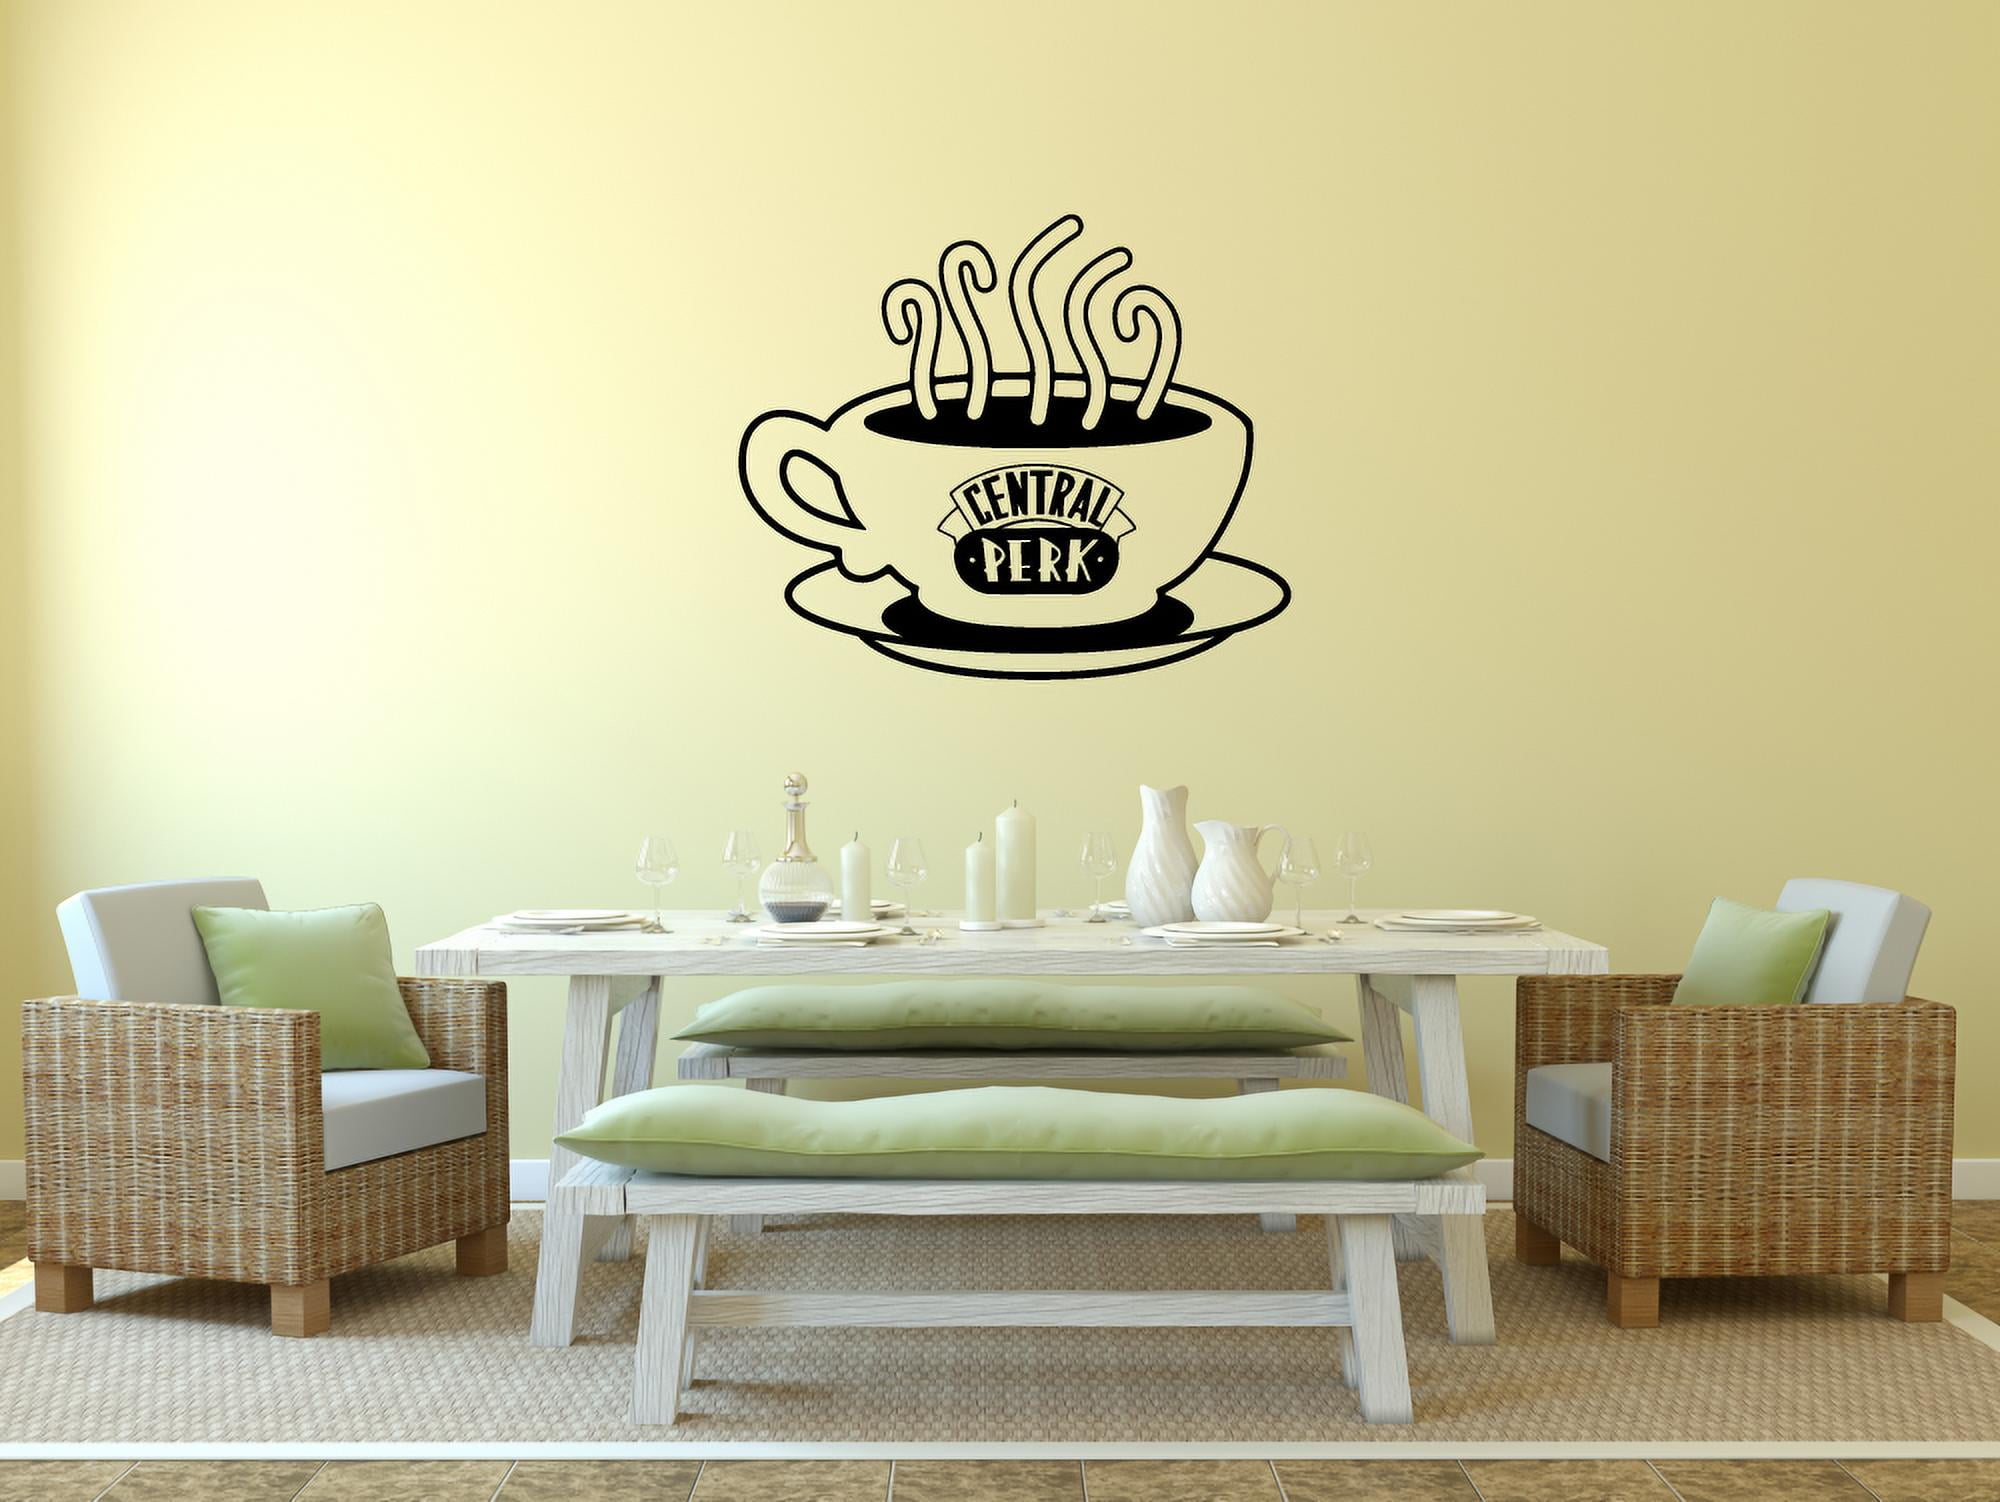 Central Perk Coffee Cup Cafe FRIENDS TV Show Wall Stickers Decor Design